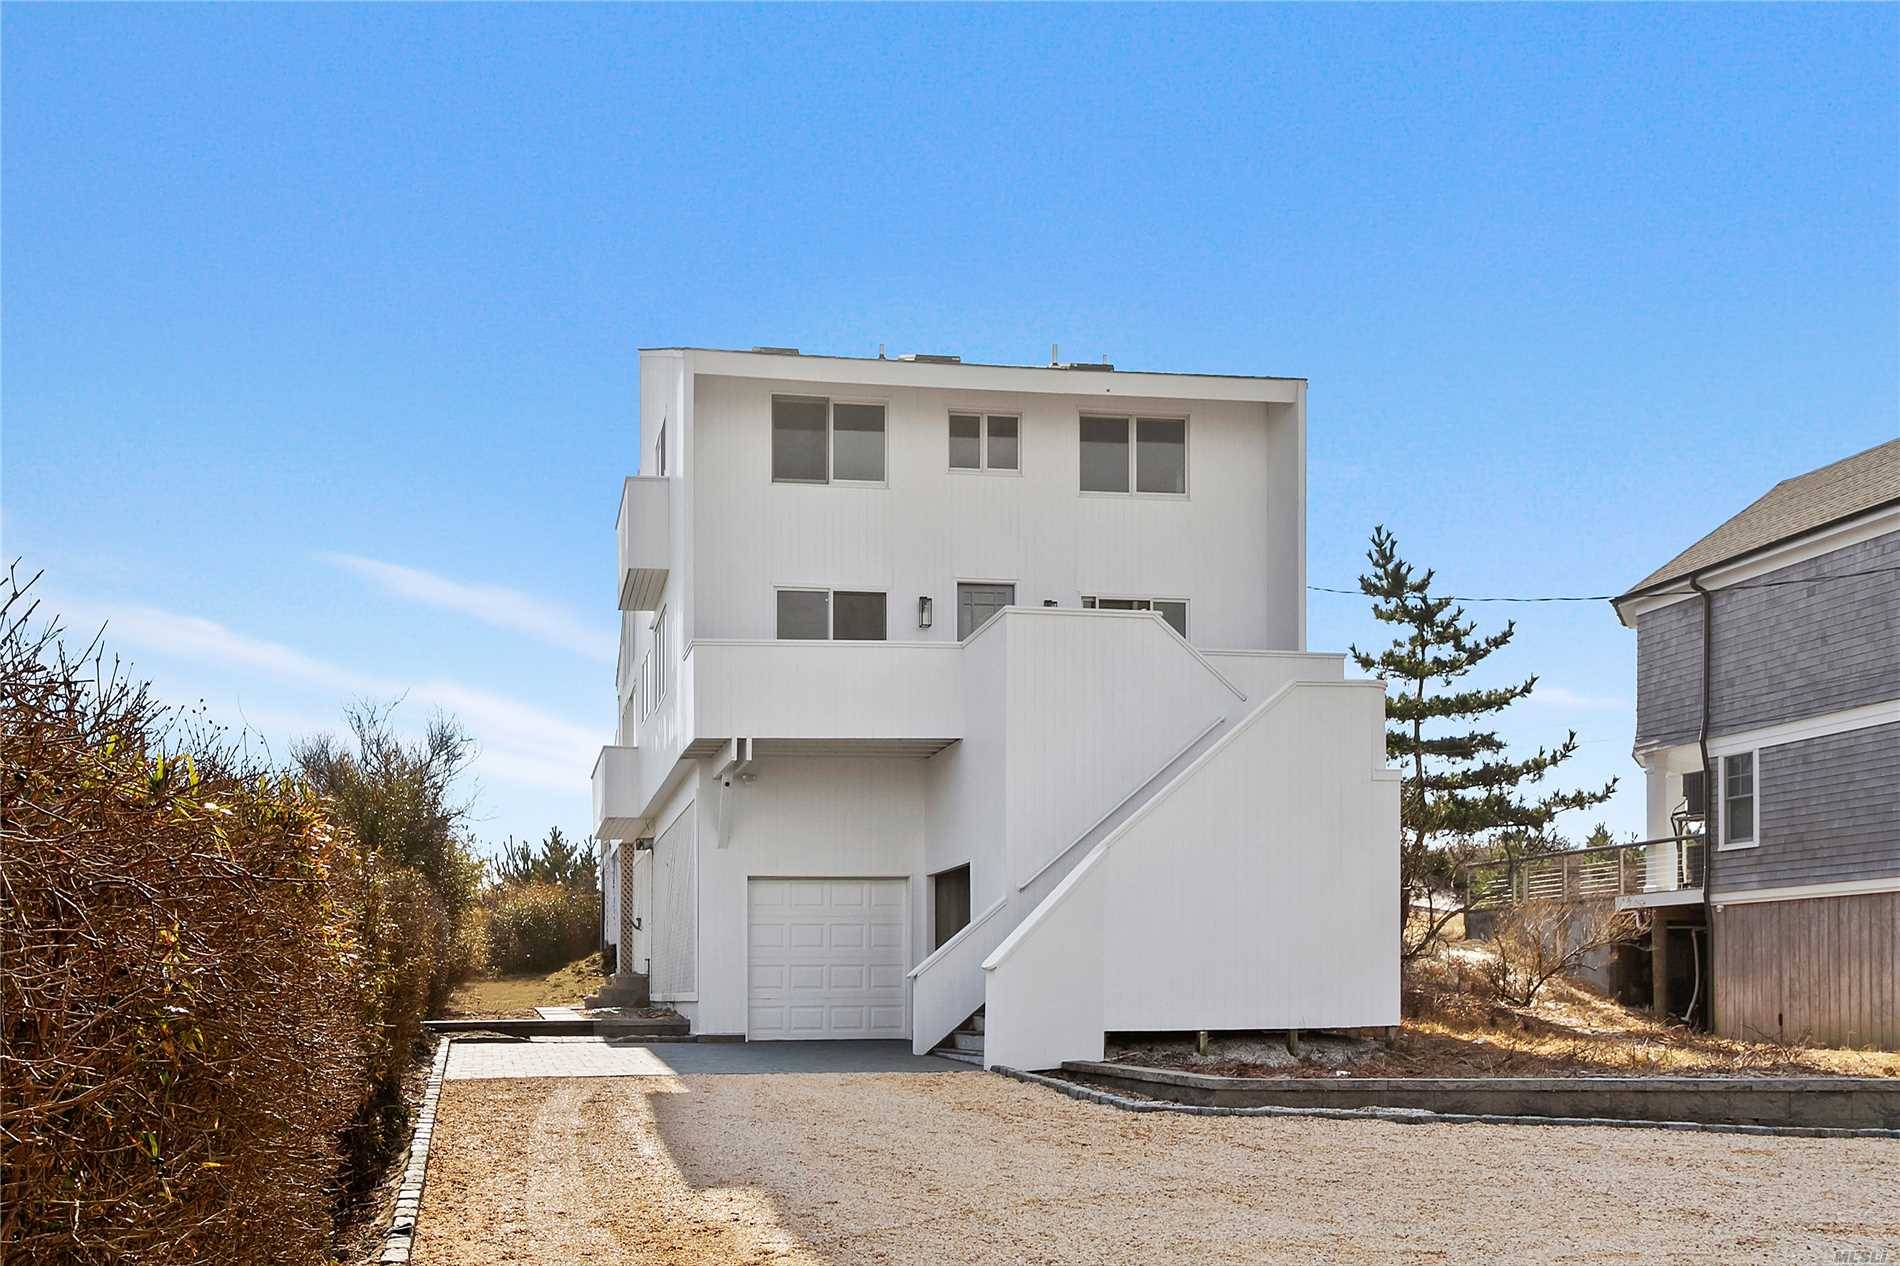 This Fully Renovated Oceanfront Has The Finest Details With Top Of The Line Appliances, Marble Countertops, New Floors, And Pristine Finishes, And Is Located Between The Bridges In Westhampton Beach.